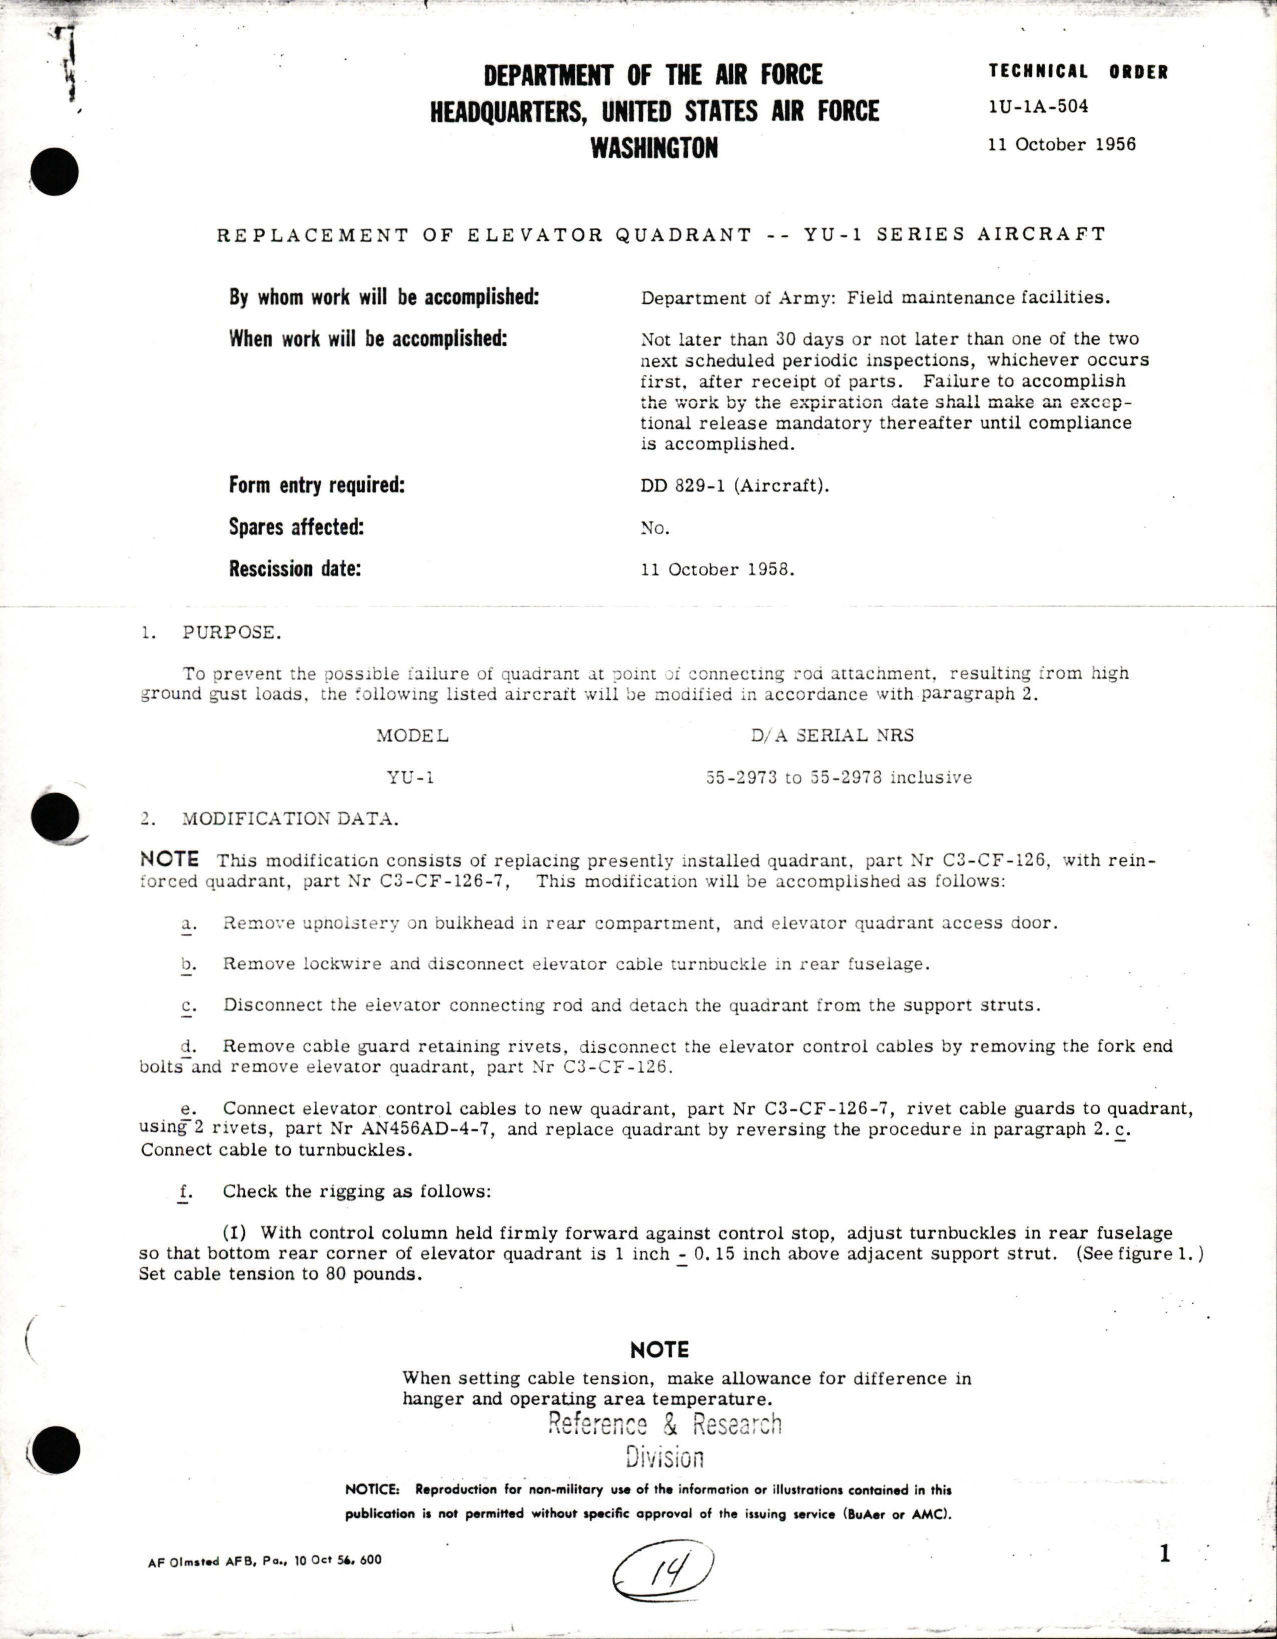 Sample page 1 from AirCorps Library document: Replacement of Elevator Quadrant for YU-1 Series